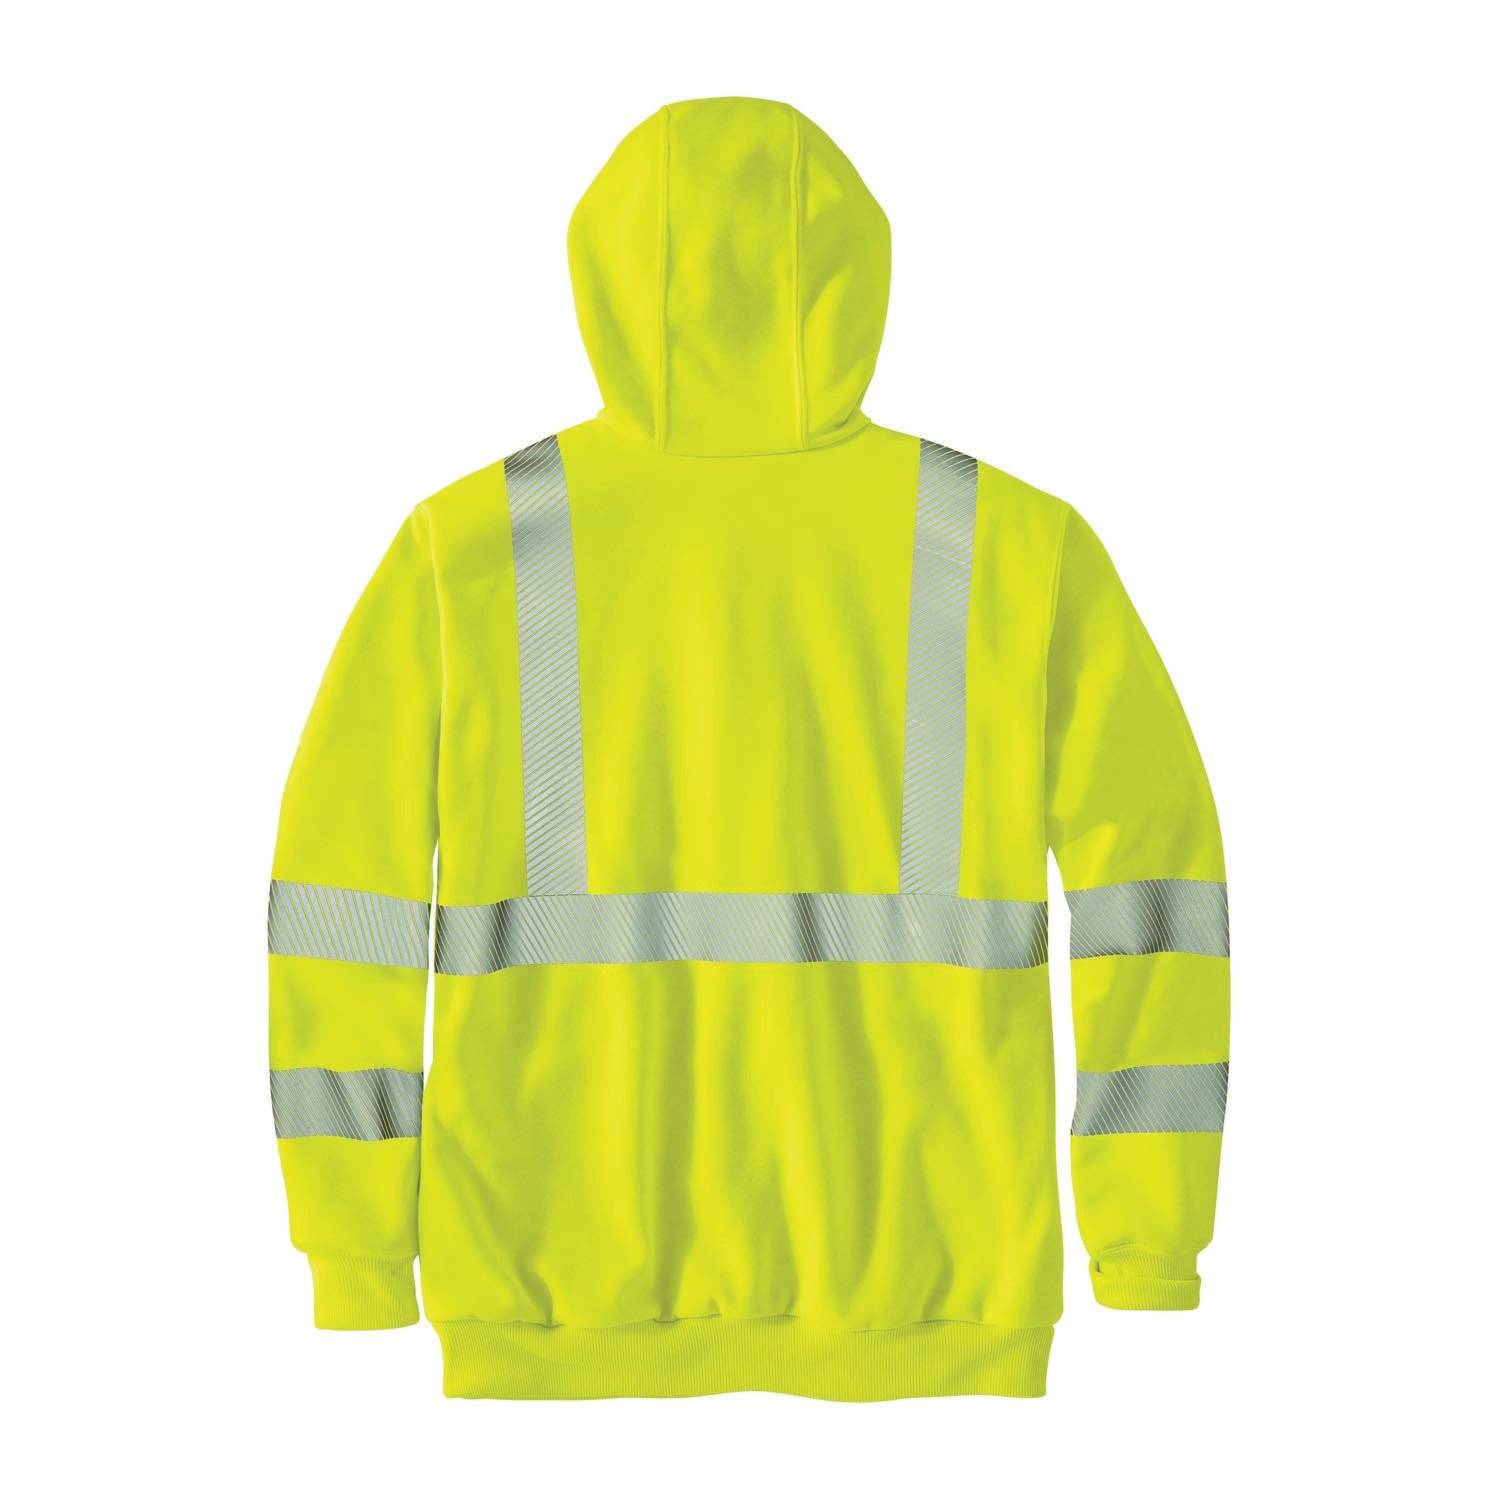 Carhartt High-Visibility Thermal-Lined Full-Zip Sweatshirts